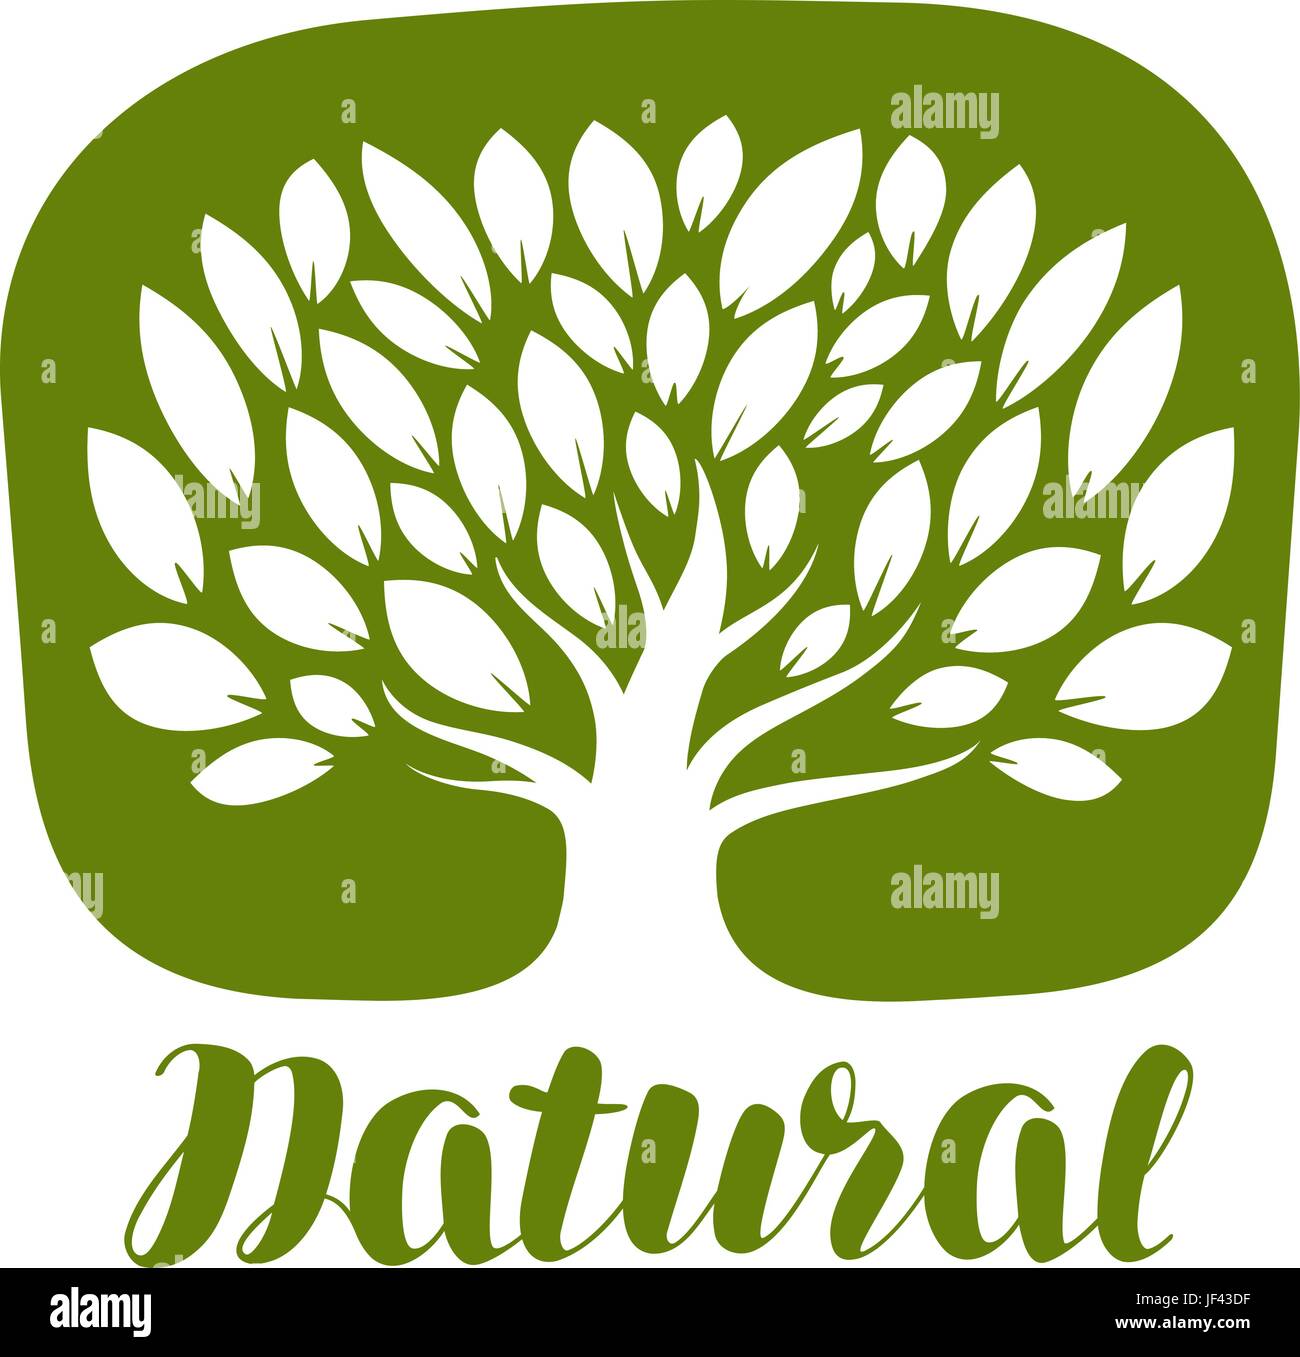 Tree with leaves label or logo. Natural, organic icon. Lettering vector illustration Stock Vector